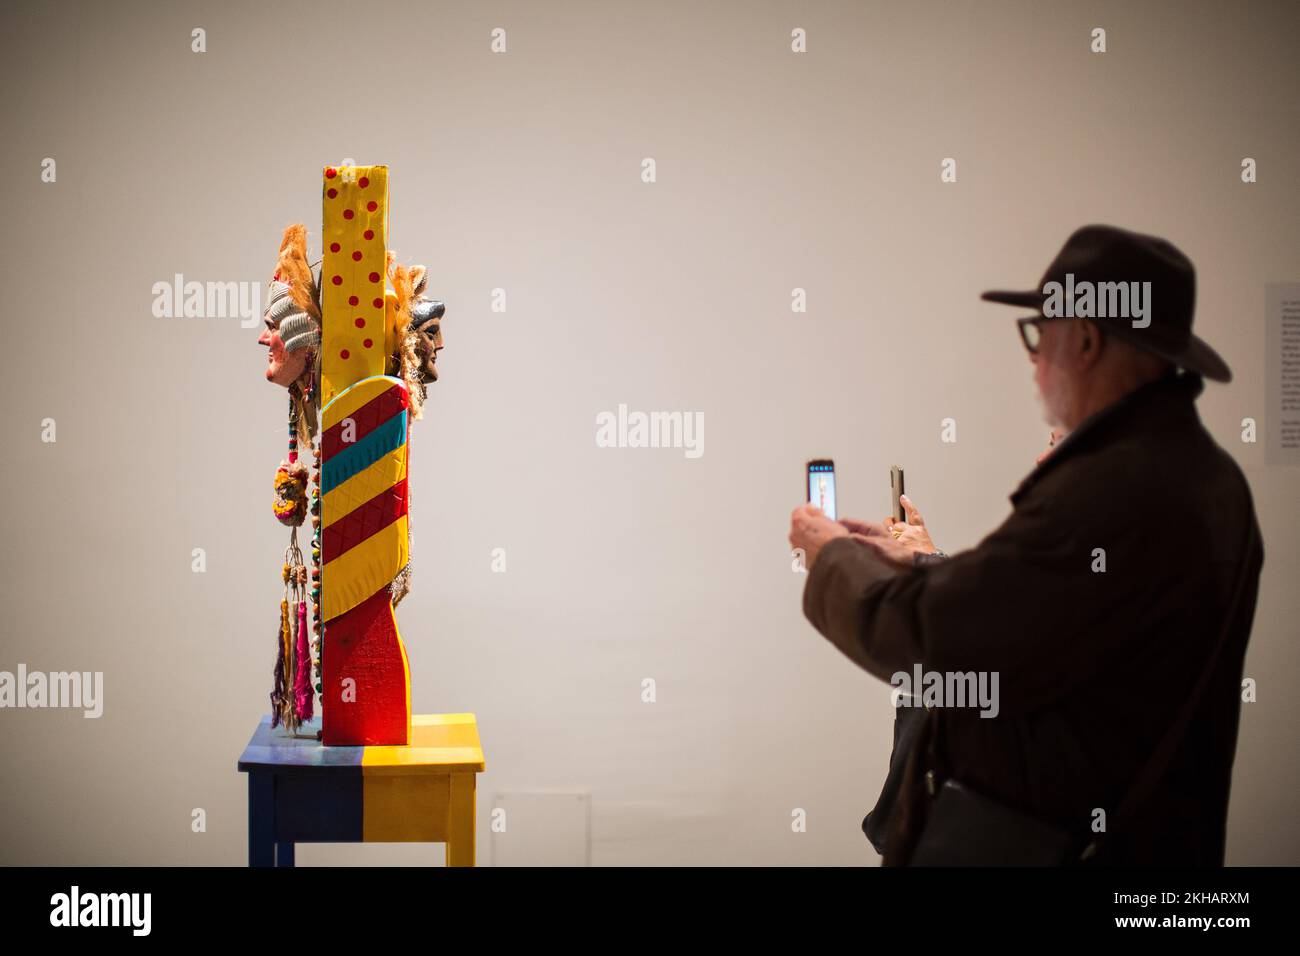 People take photographs of a sculpture entitled 'The Old Woman' during the inauguration of the exhibition of the Guatemalan artist Margarita Azurdia (1931 - 1998). The Reina Sofia Museum in Madrid inaugurated the exhibition entitled 'Margarita Rita Rica Dinamita' by the Guatemalan artist Margarita Azurdia (1931 - 1998), this exhibition of more than one hundred works is the first in Spain and in Europe by the artist, it presents the unique work of an emblematic figure with a restless, playful and transgressive spirit that permeates the Guatemalan artistic context of the second half of the 20th Stock Photo